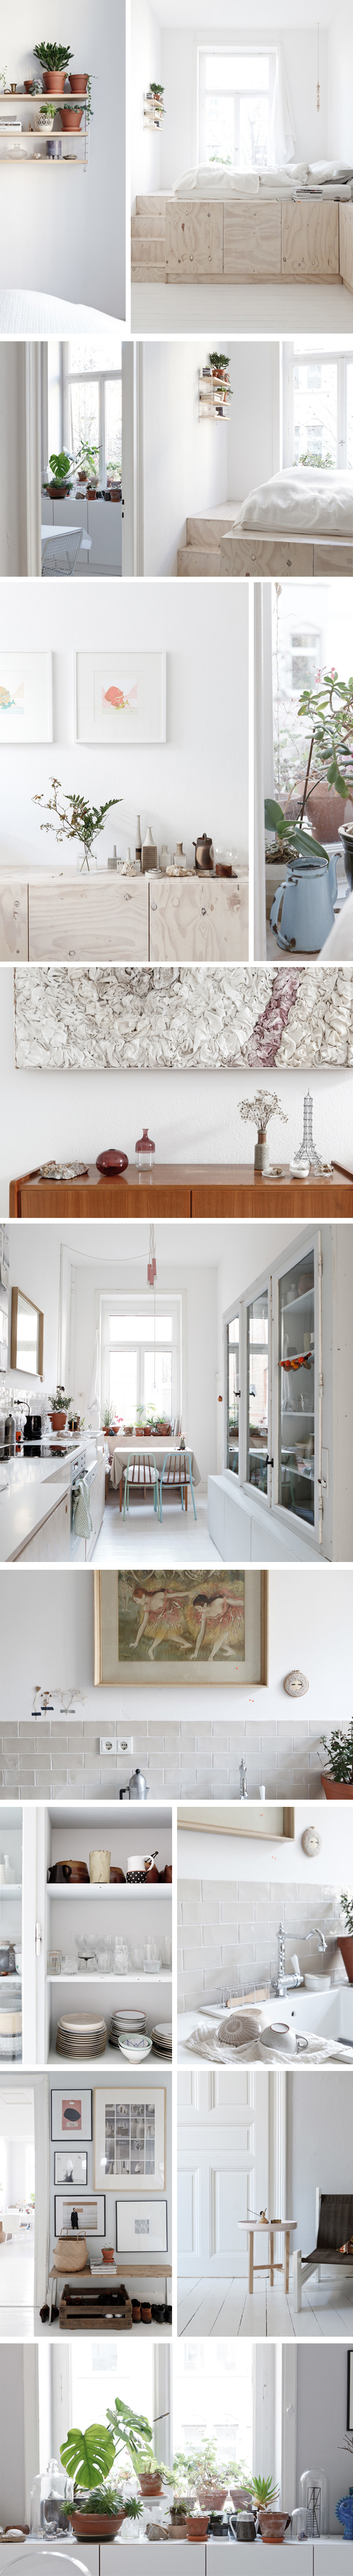 appartement-style-scandinave-decoration